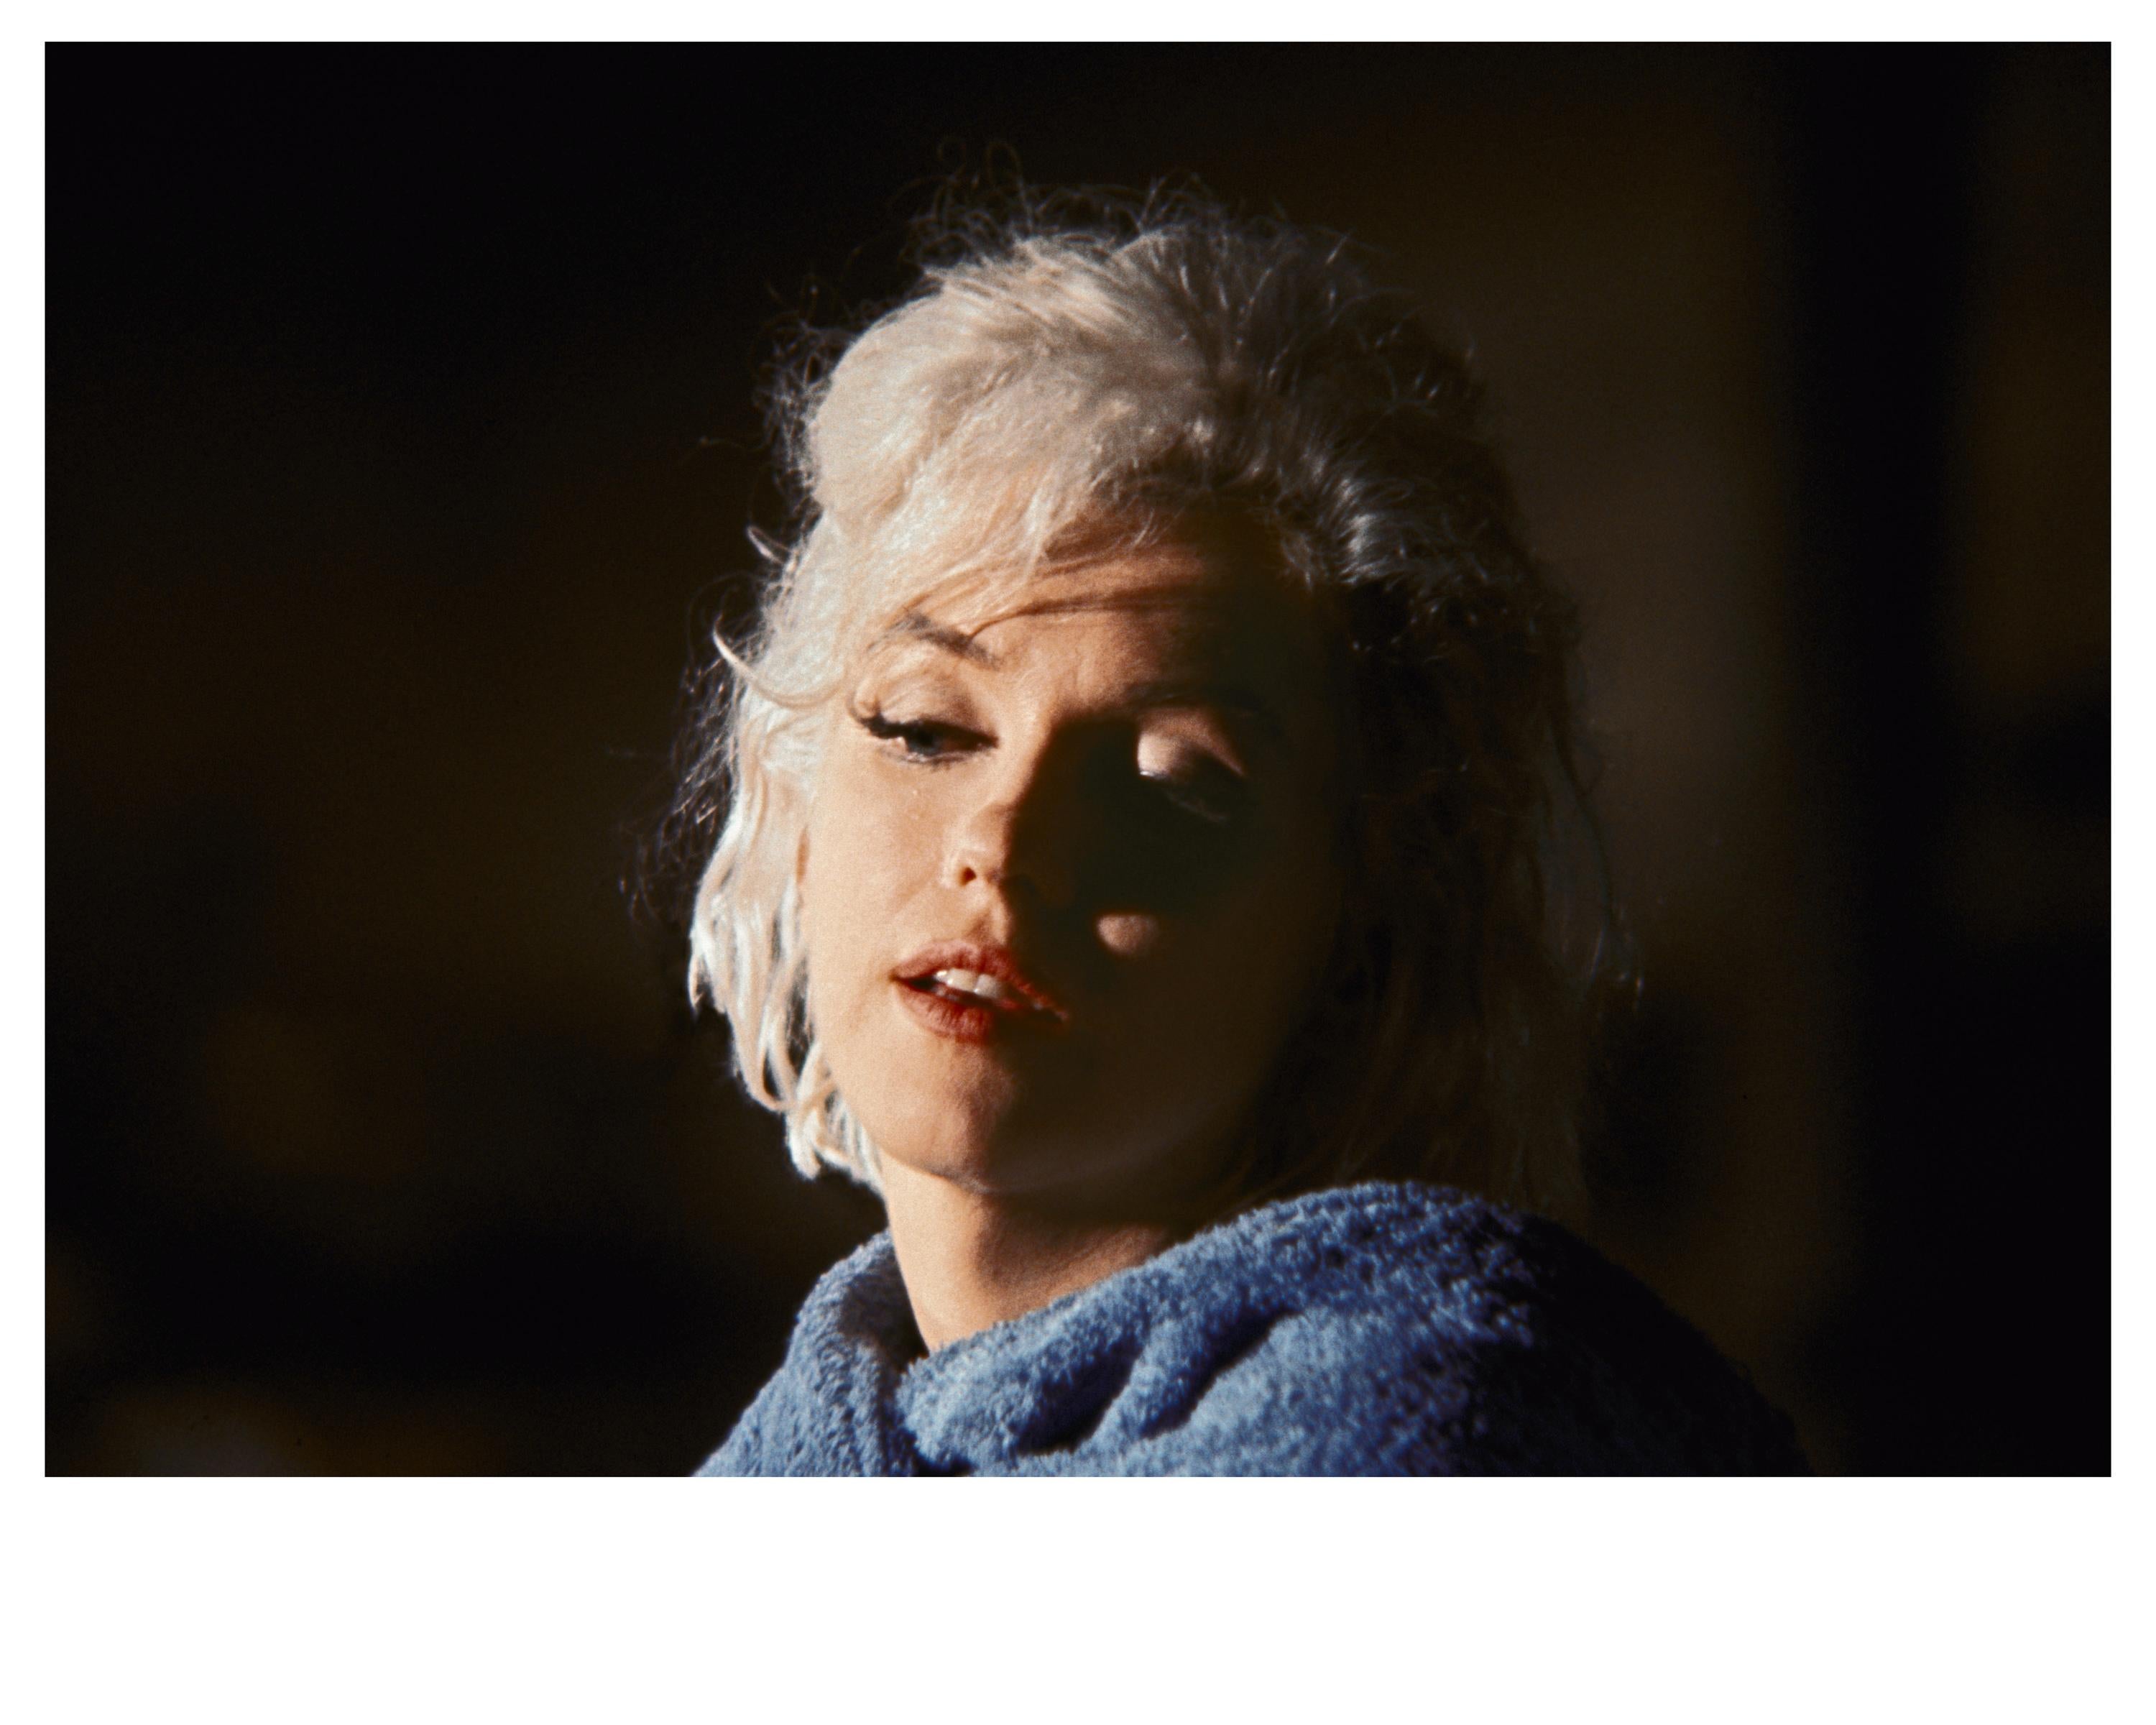 'Marilyn Monroe, 1962' by American photographer, Lawrence Schiller. Archival digital pigment, Ed. 9/25. Image: 13.25 x 19 in. / Paper: 16 x 20 in. From the set of the film 'Something's Got to Give', this colored photograph features a closeup of